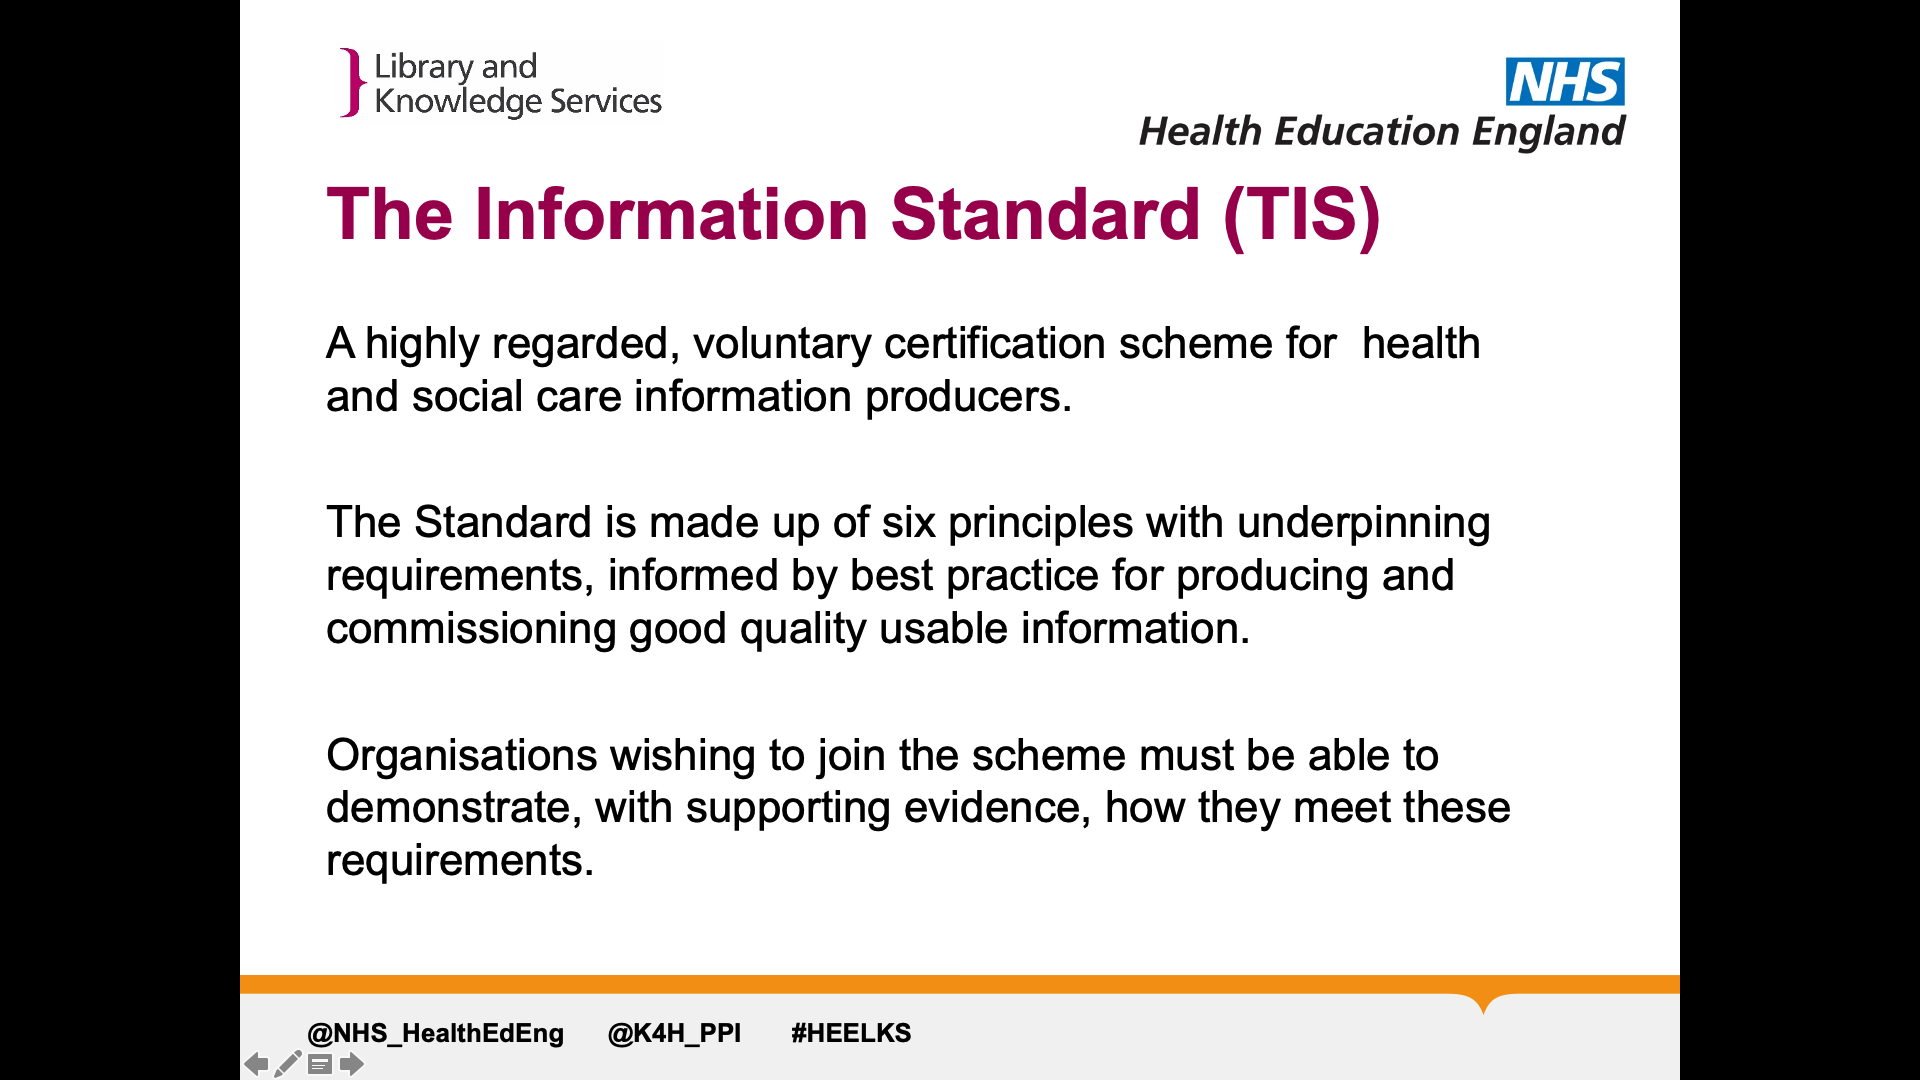 Title: The information standard (TIS). Text on page: A highly regarded, voluntary certification scheme for  health and social care information producers.  The Standard is made up of six principles with underpinning requirements, informed by best practice for producing and commissioning good quality usable information.   Organisations wishing to join the scheme must be able to demonstrate, with supporting evidence, how they meet these requirements.